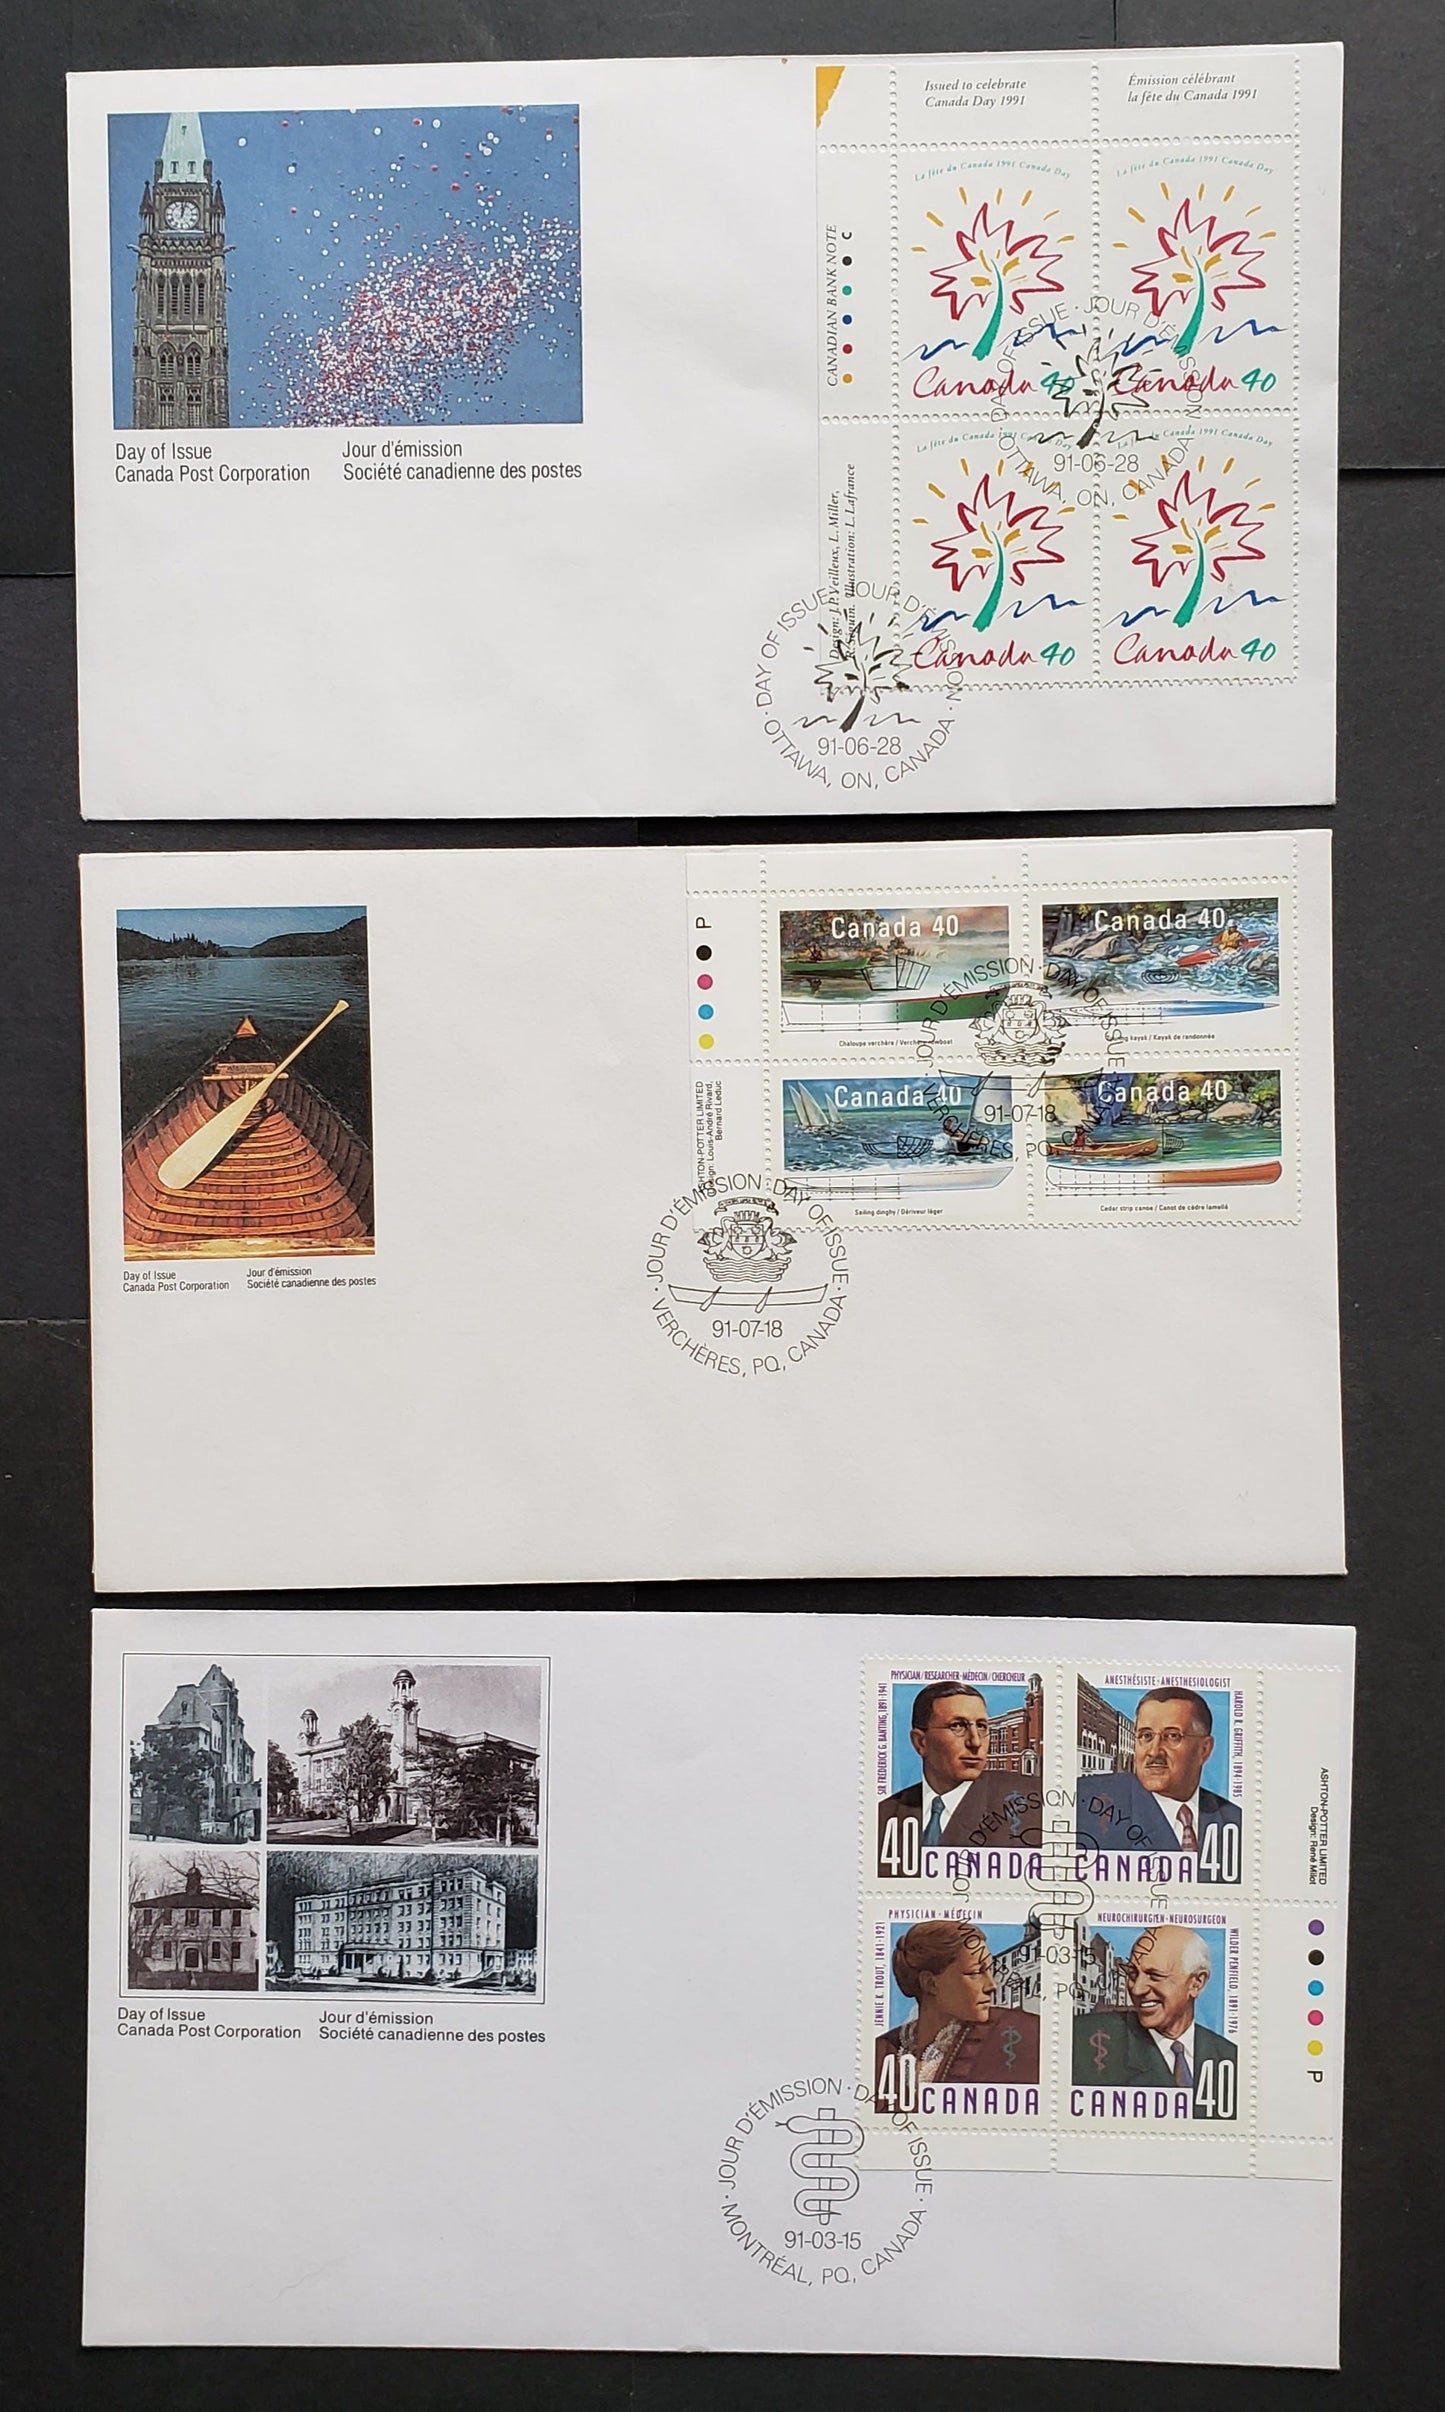 Lot 94 Canada #1305a, 1316, 1320a 40c Multicolor 1991 Doctors - Small Craft Issues, 3 Canada Post FDC's Franked With UL & LR Inscription Blocks, Approx 22,000 Of Each Produced, Cat. Value $10.65